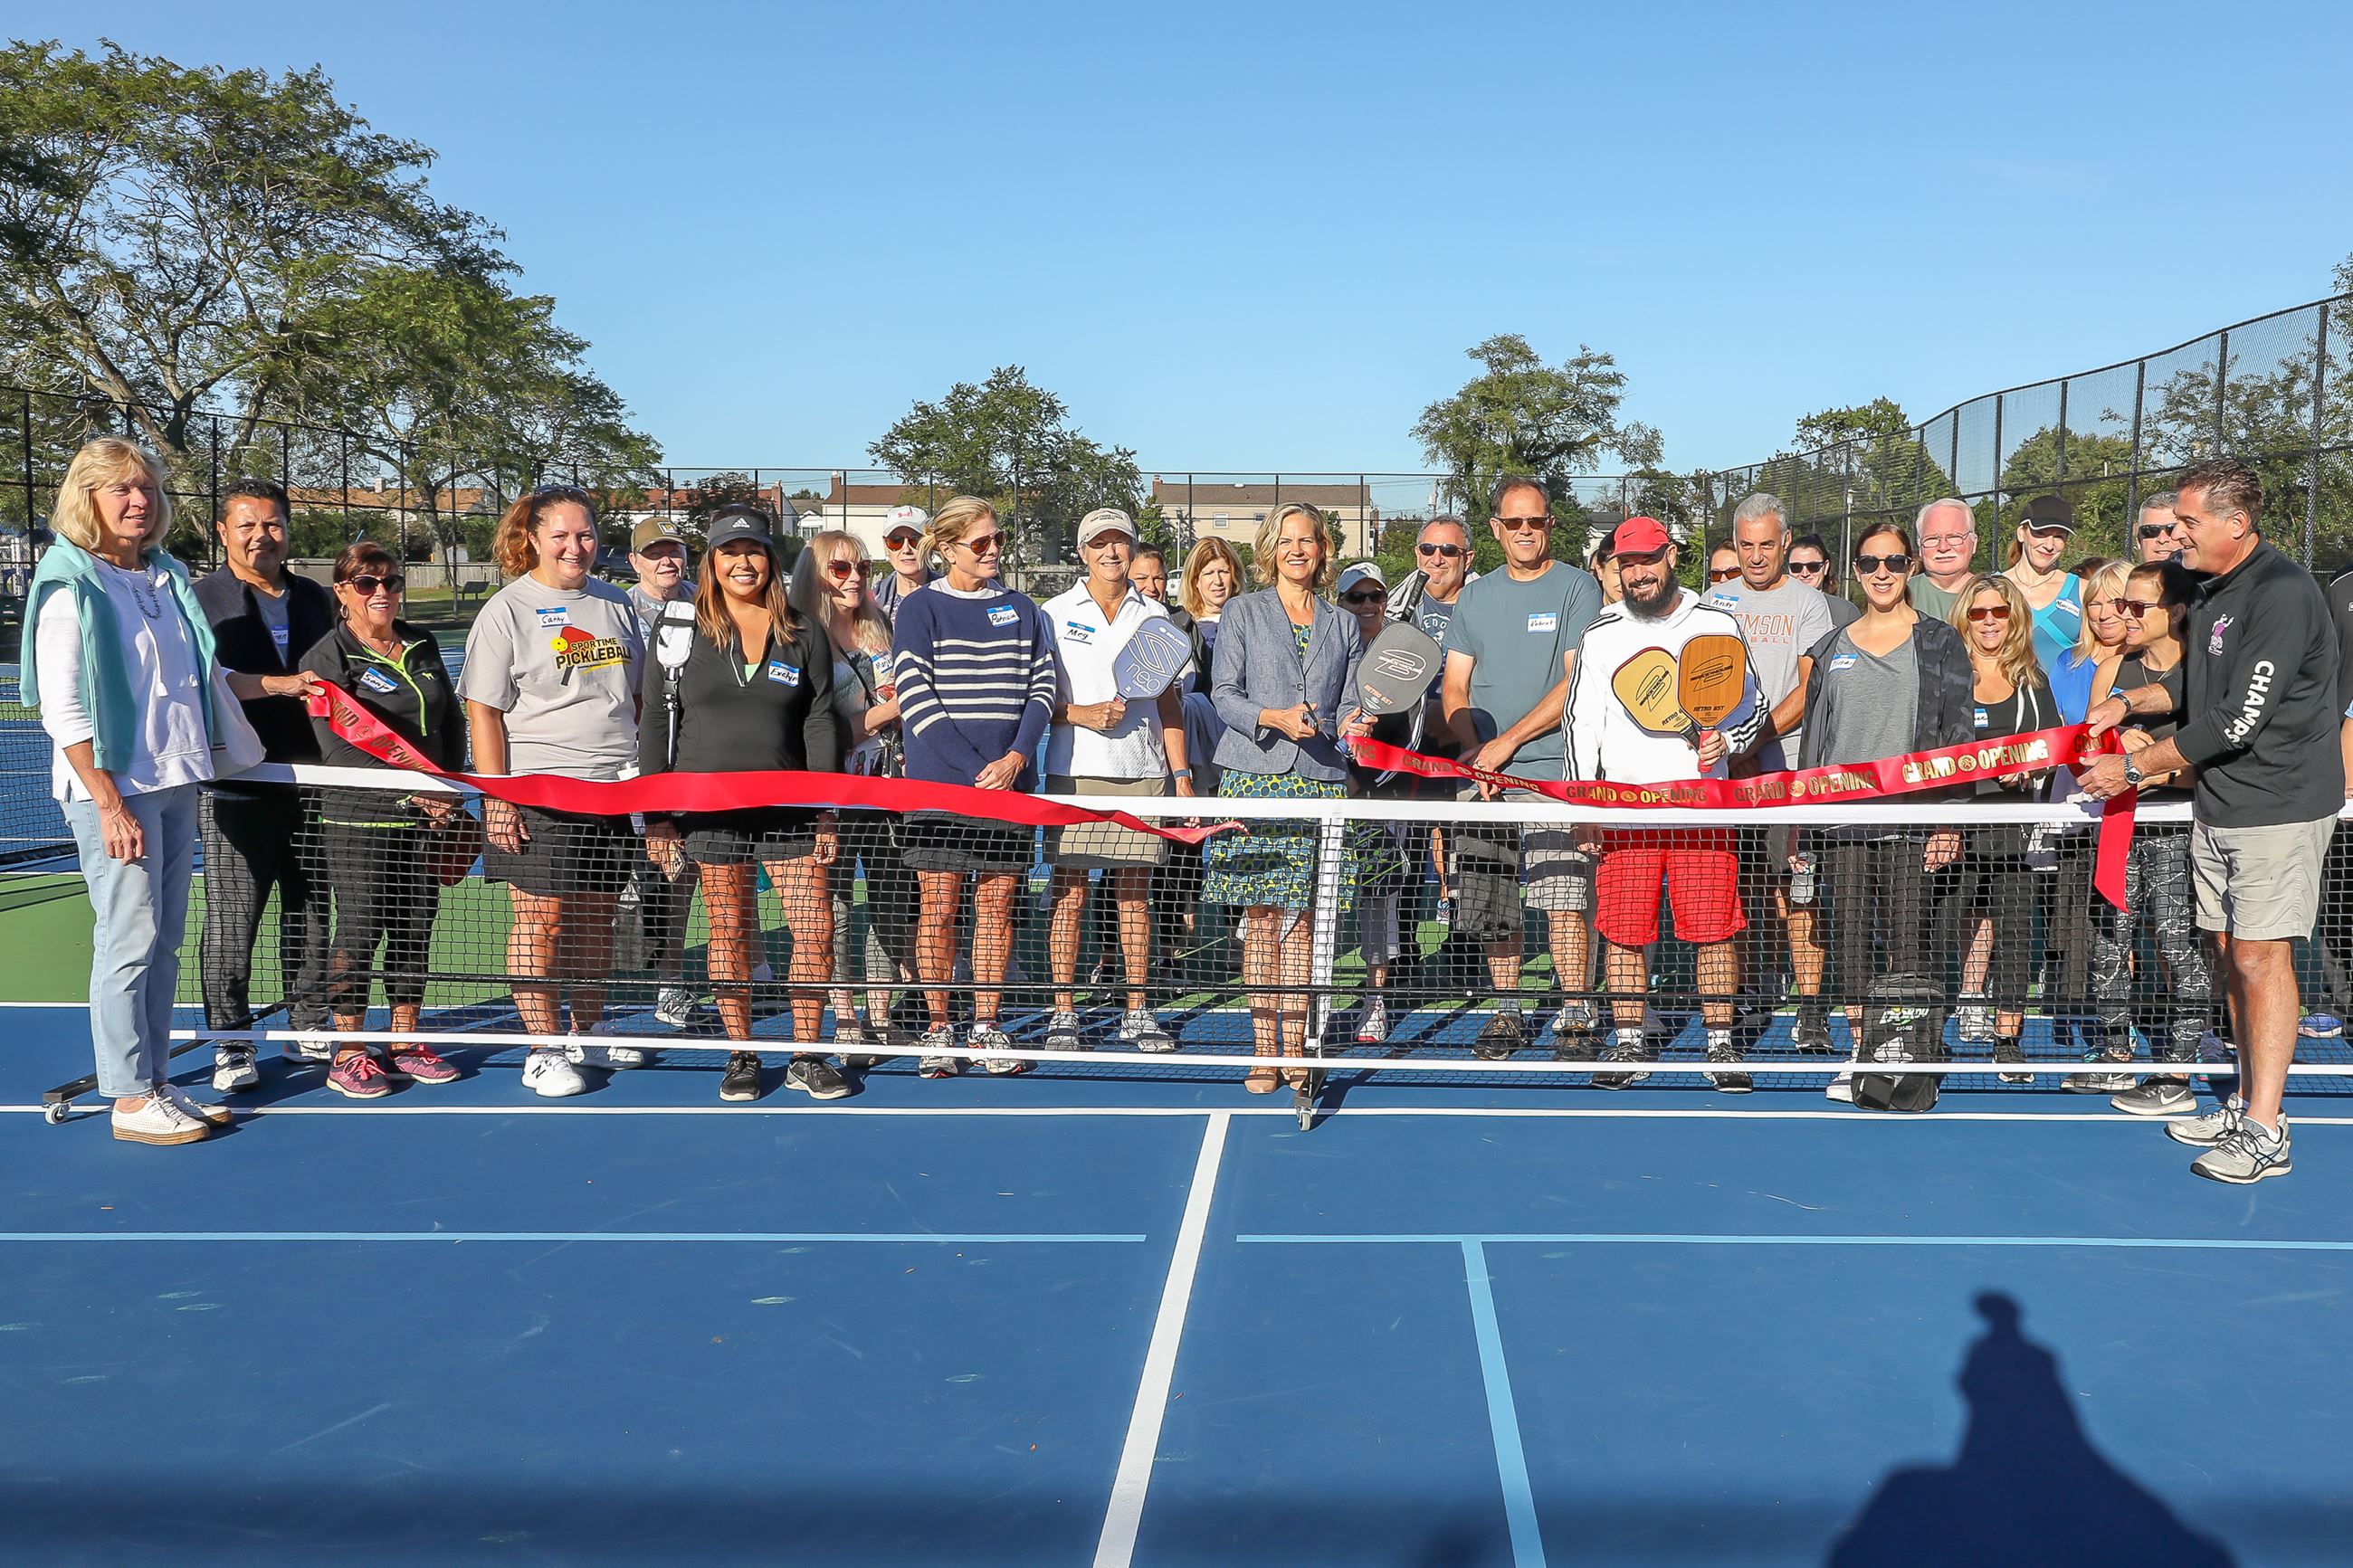 pickle2Curran: 21 New Pickleball Courts Ready for Play